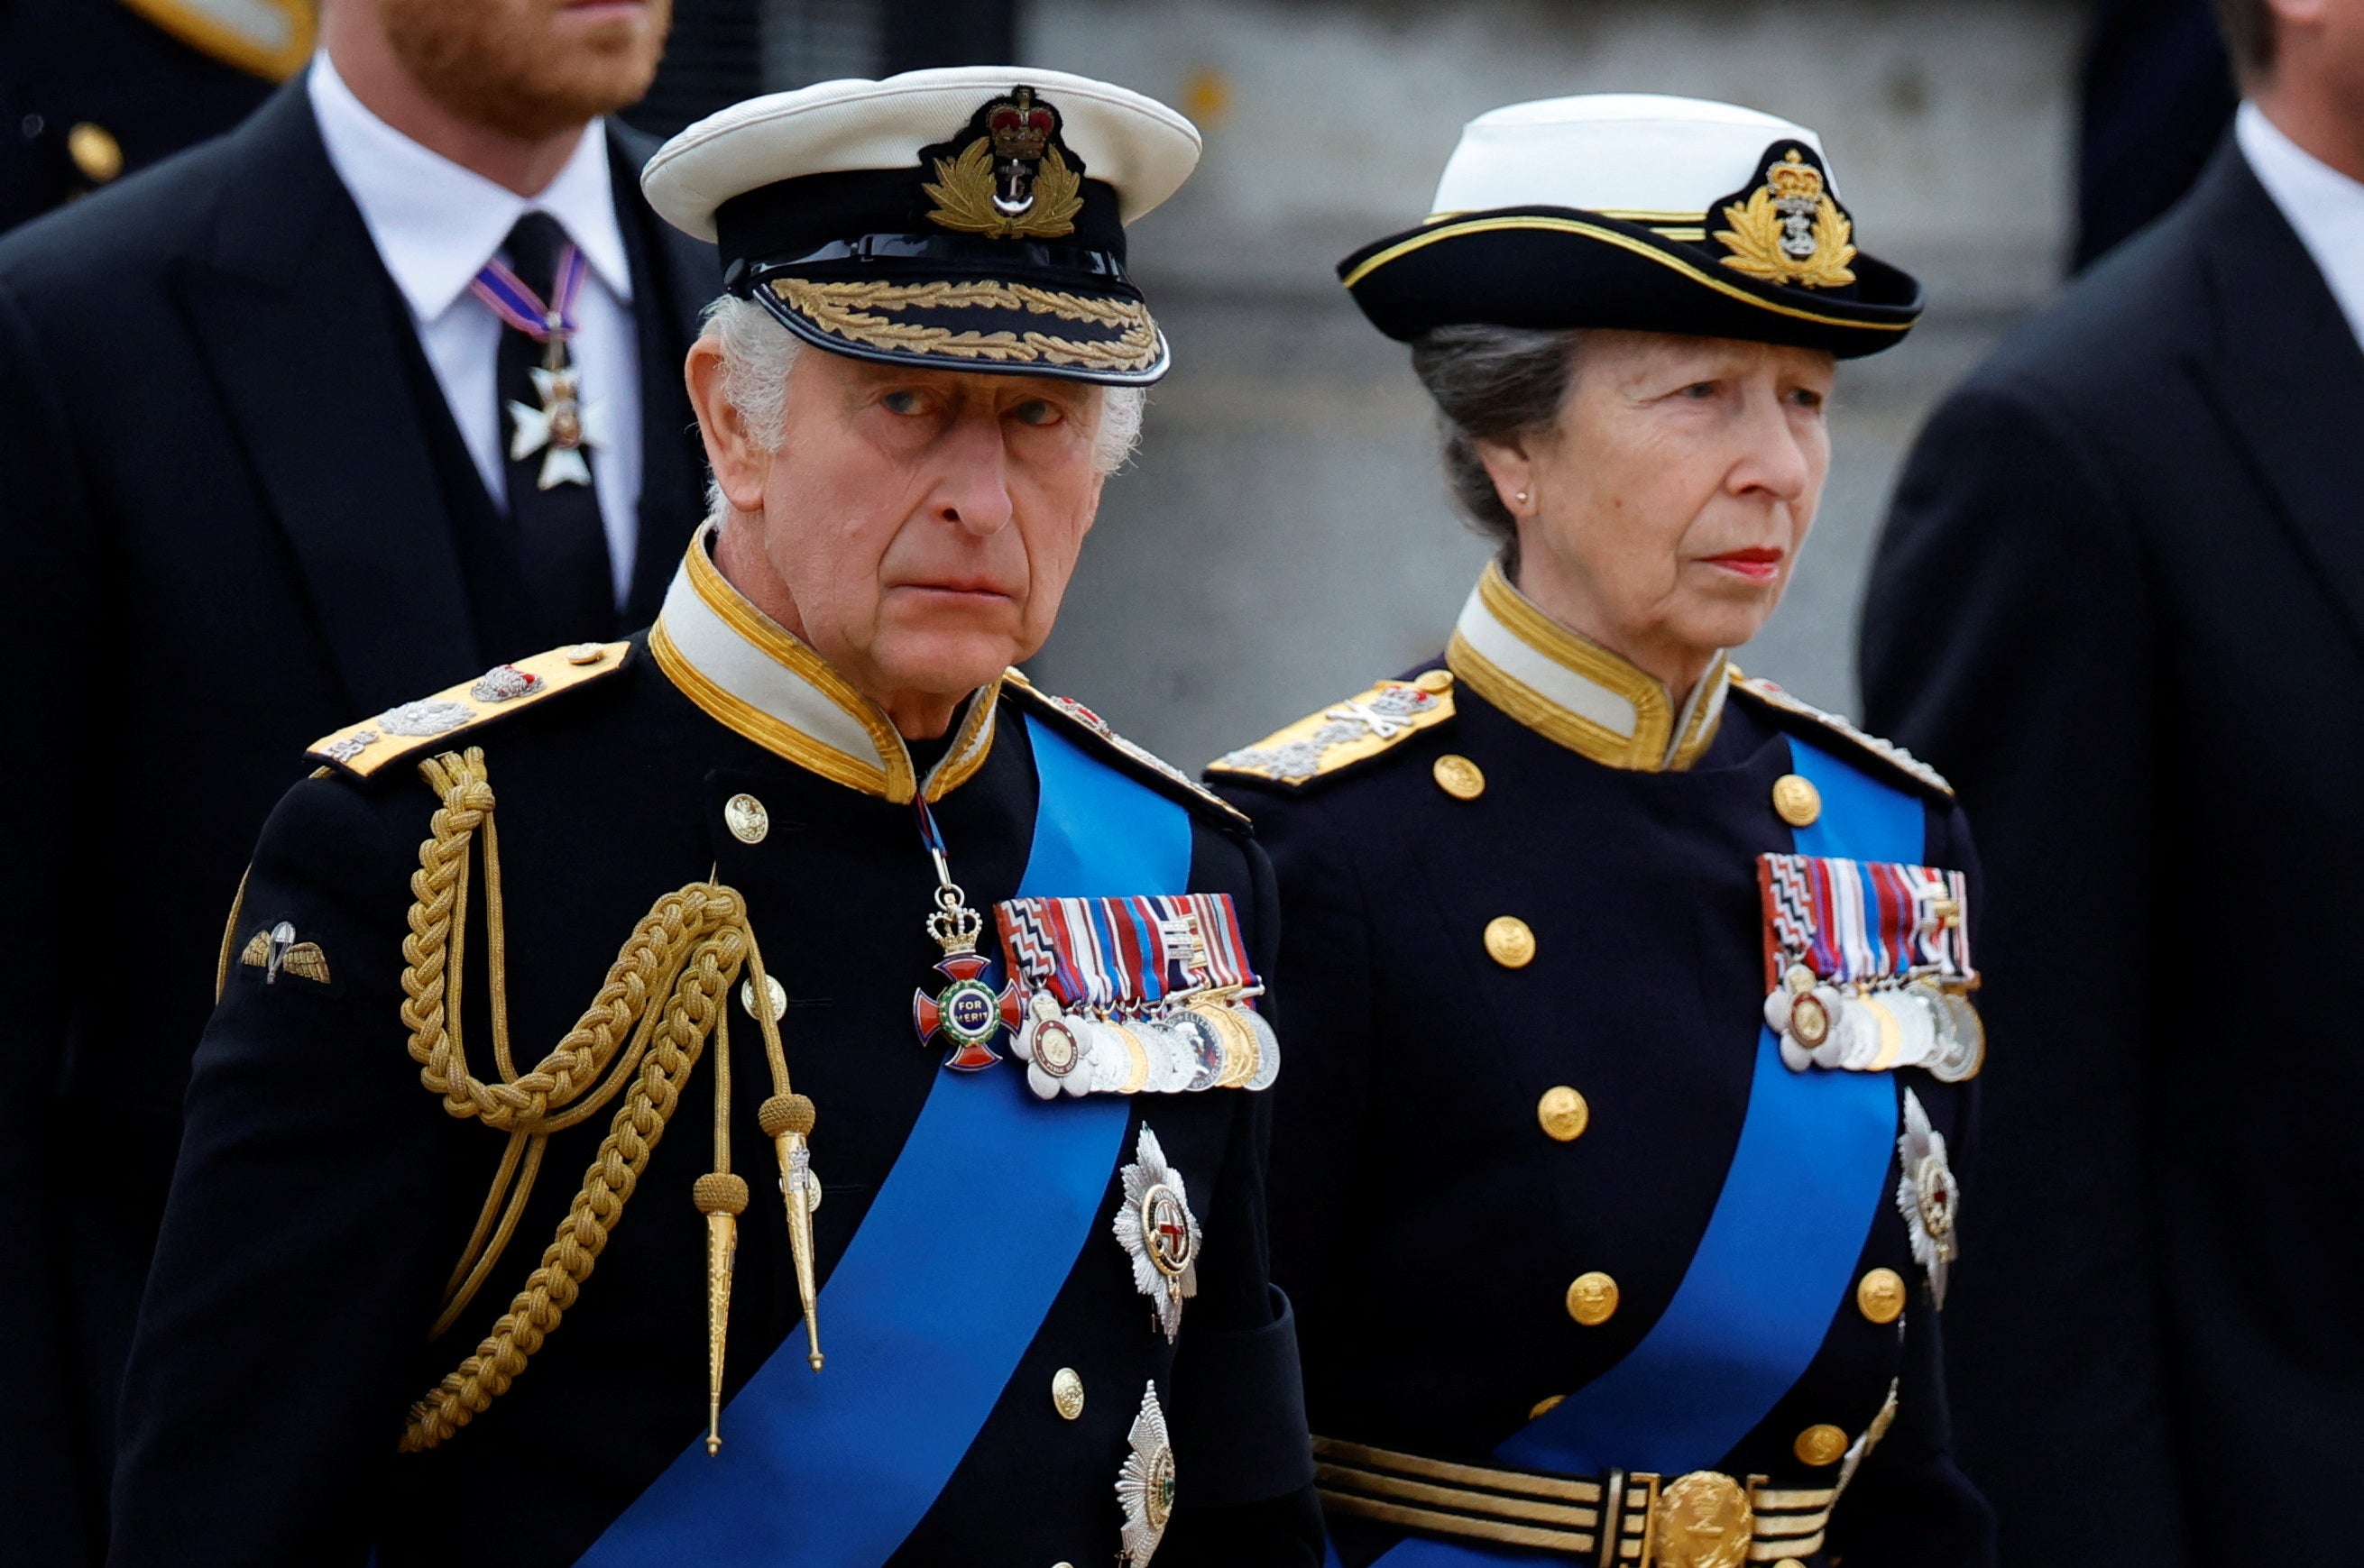 prince william, kate middleton, prince george, prince louis, princess charlotte, taylor swift, wembley stadium, prince harry, meghan markle, king charles iii, camilla, princess anne, royal news live: princess anne’s husband gives health update as she remains in hospital for fourth day